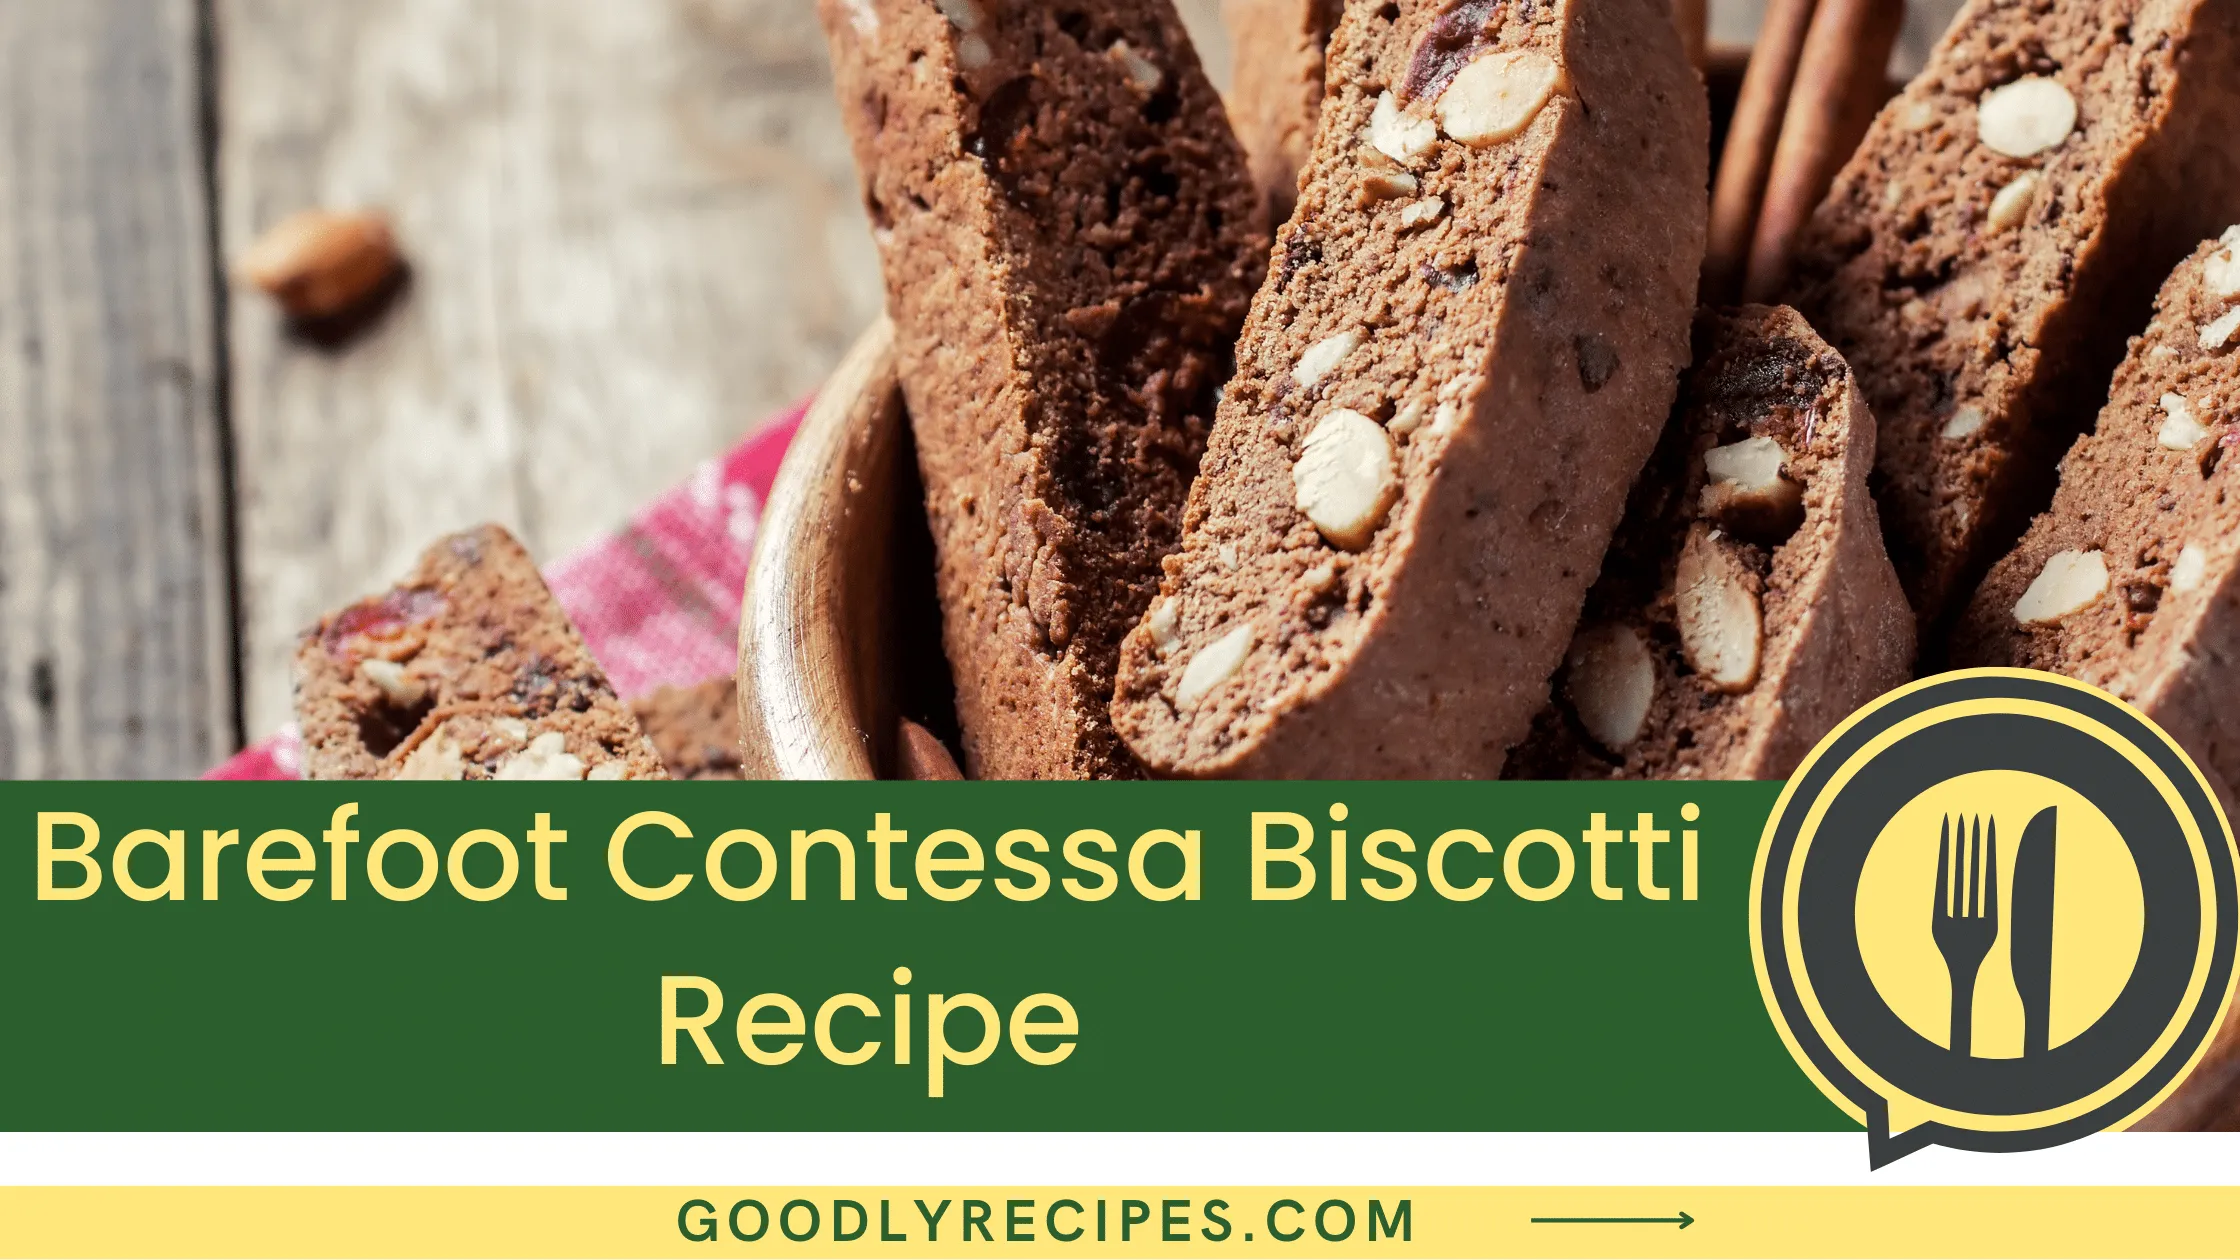 What is Barefoot Contessa Biscotti?